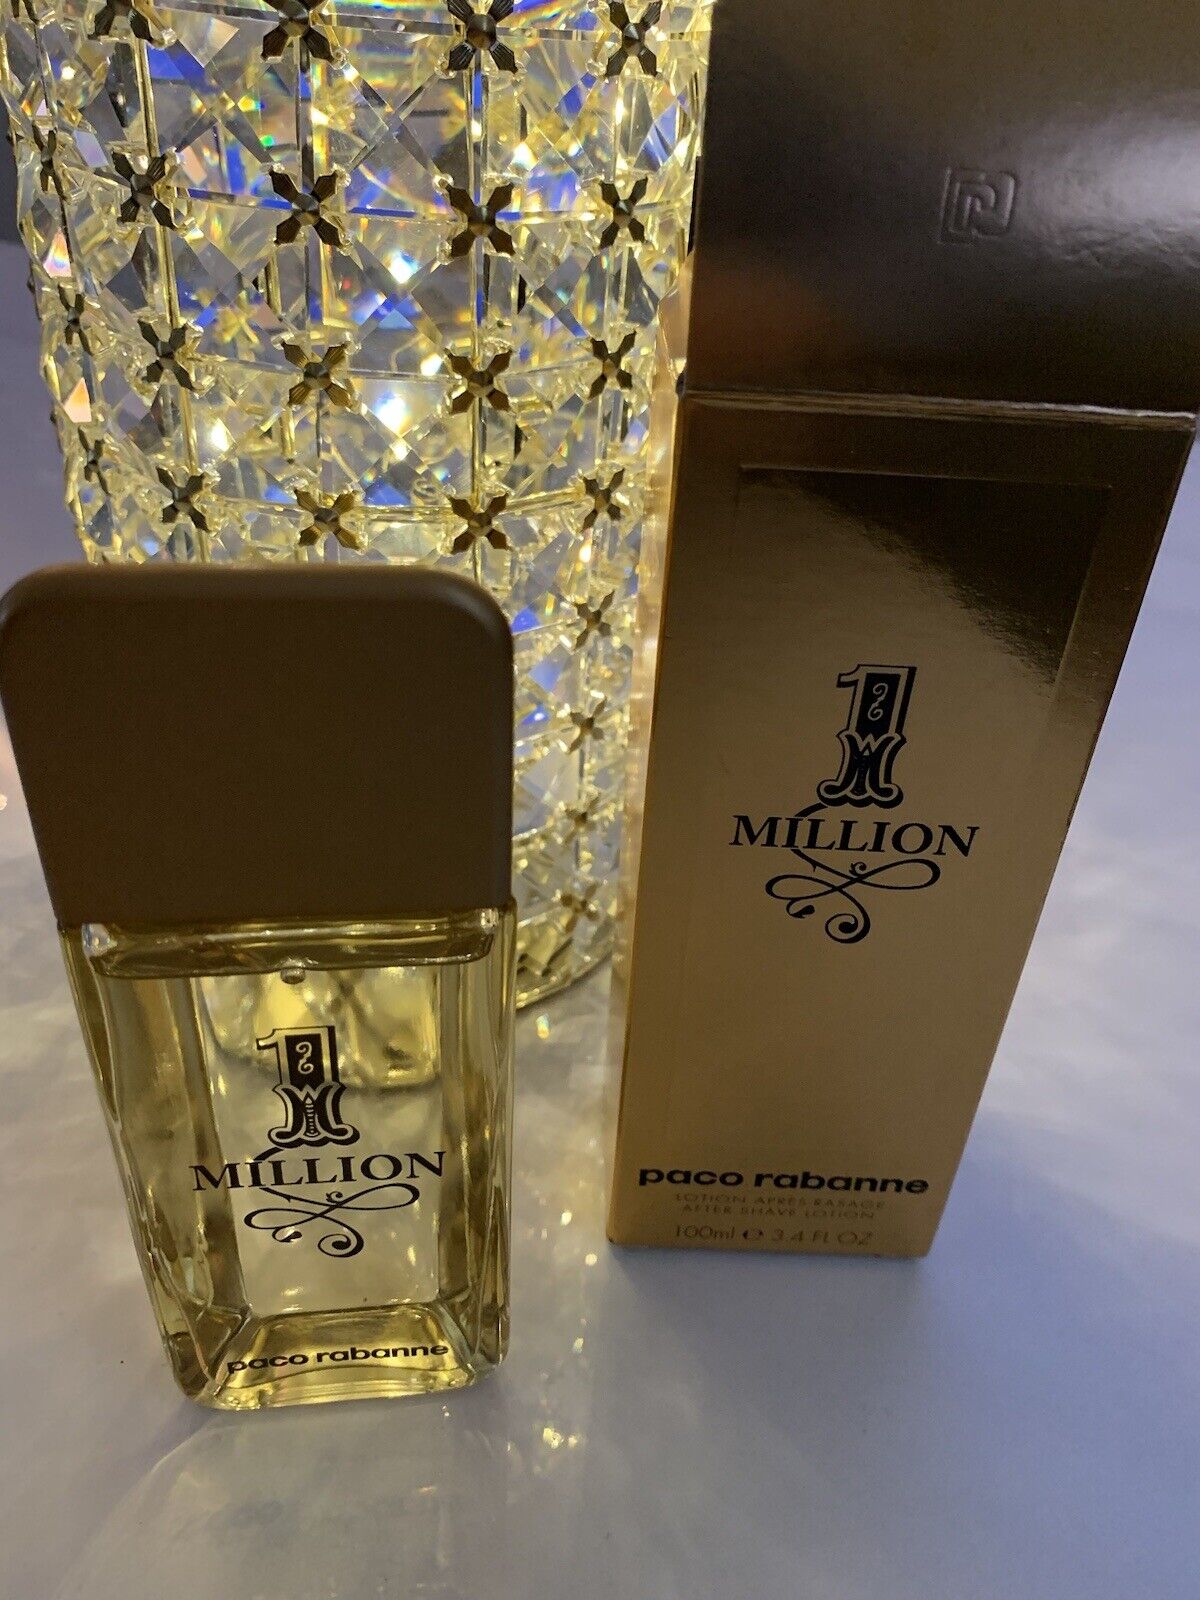 1 Million By Paco Rabanne Aftershave Lotion Splash Nearly Full 100ml/3.4 Fl OZ